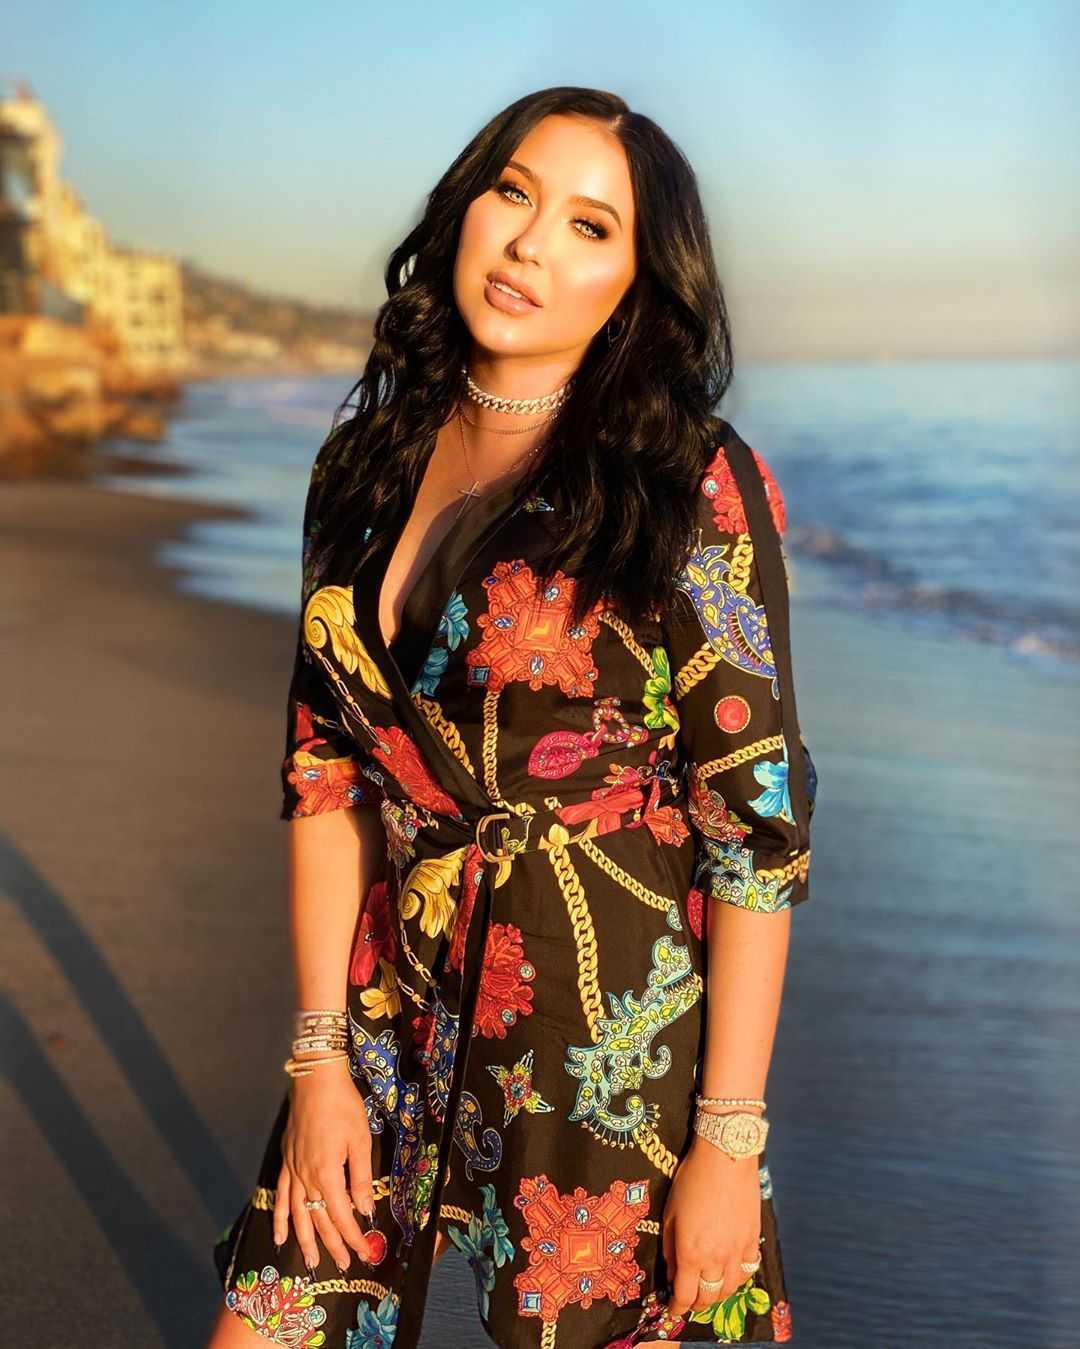 51 Sexy Jaclyn Hill Boobs Pictures Will Induce Passionate Feelings for Her 17